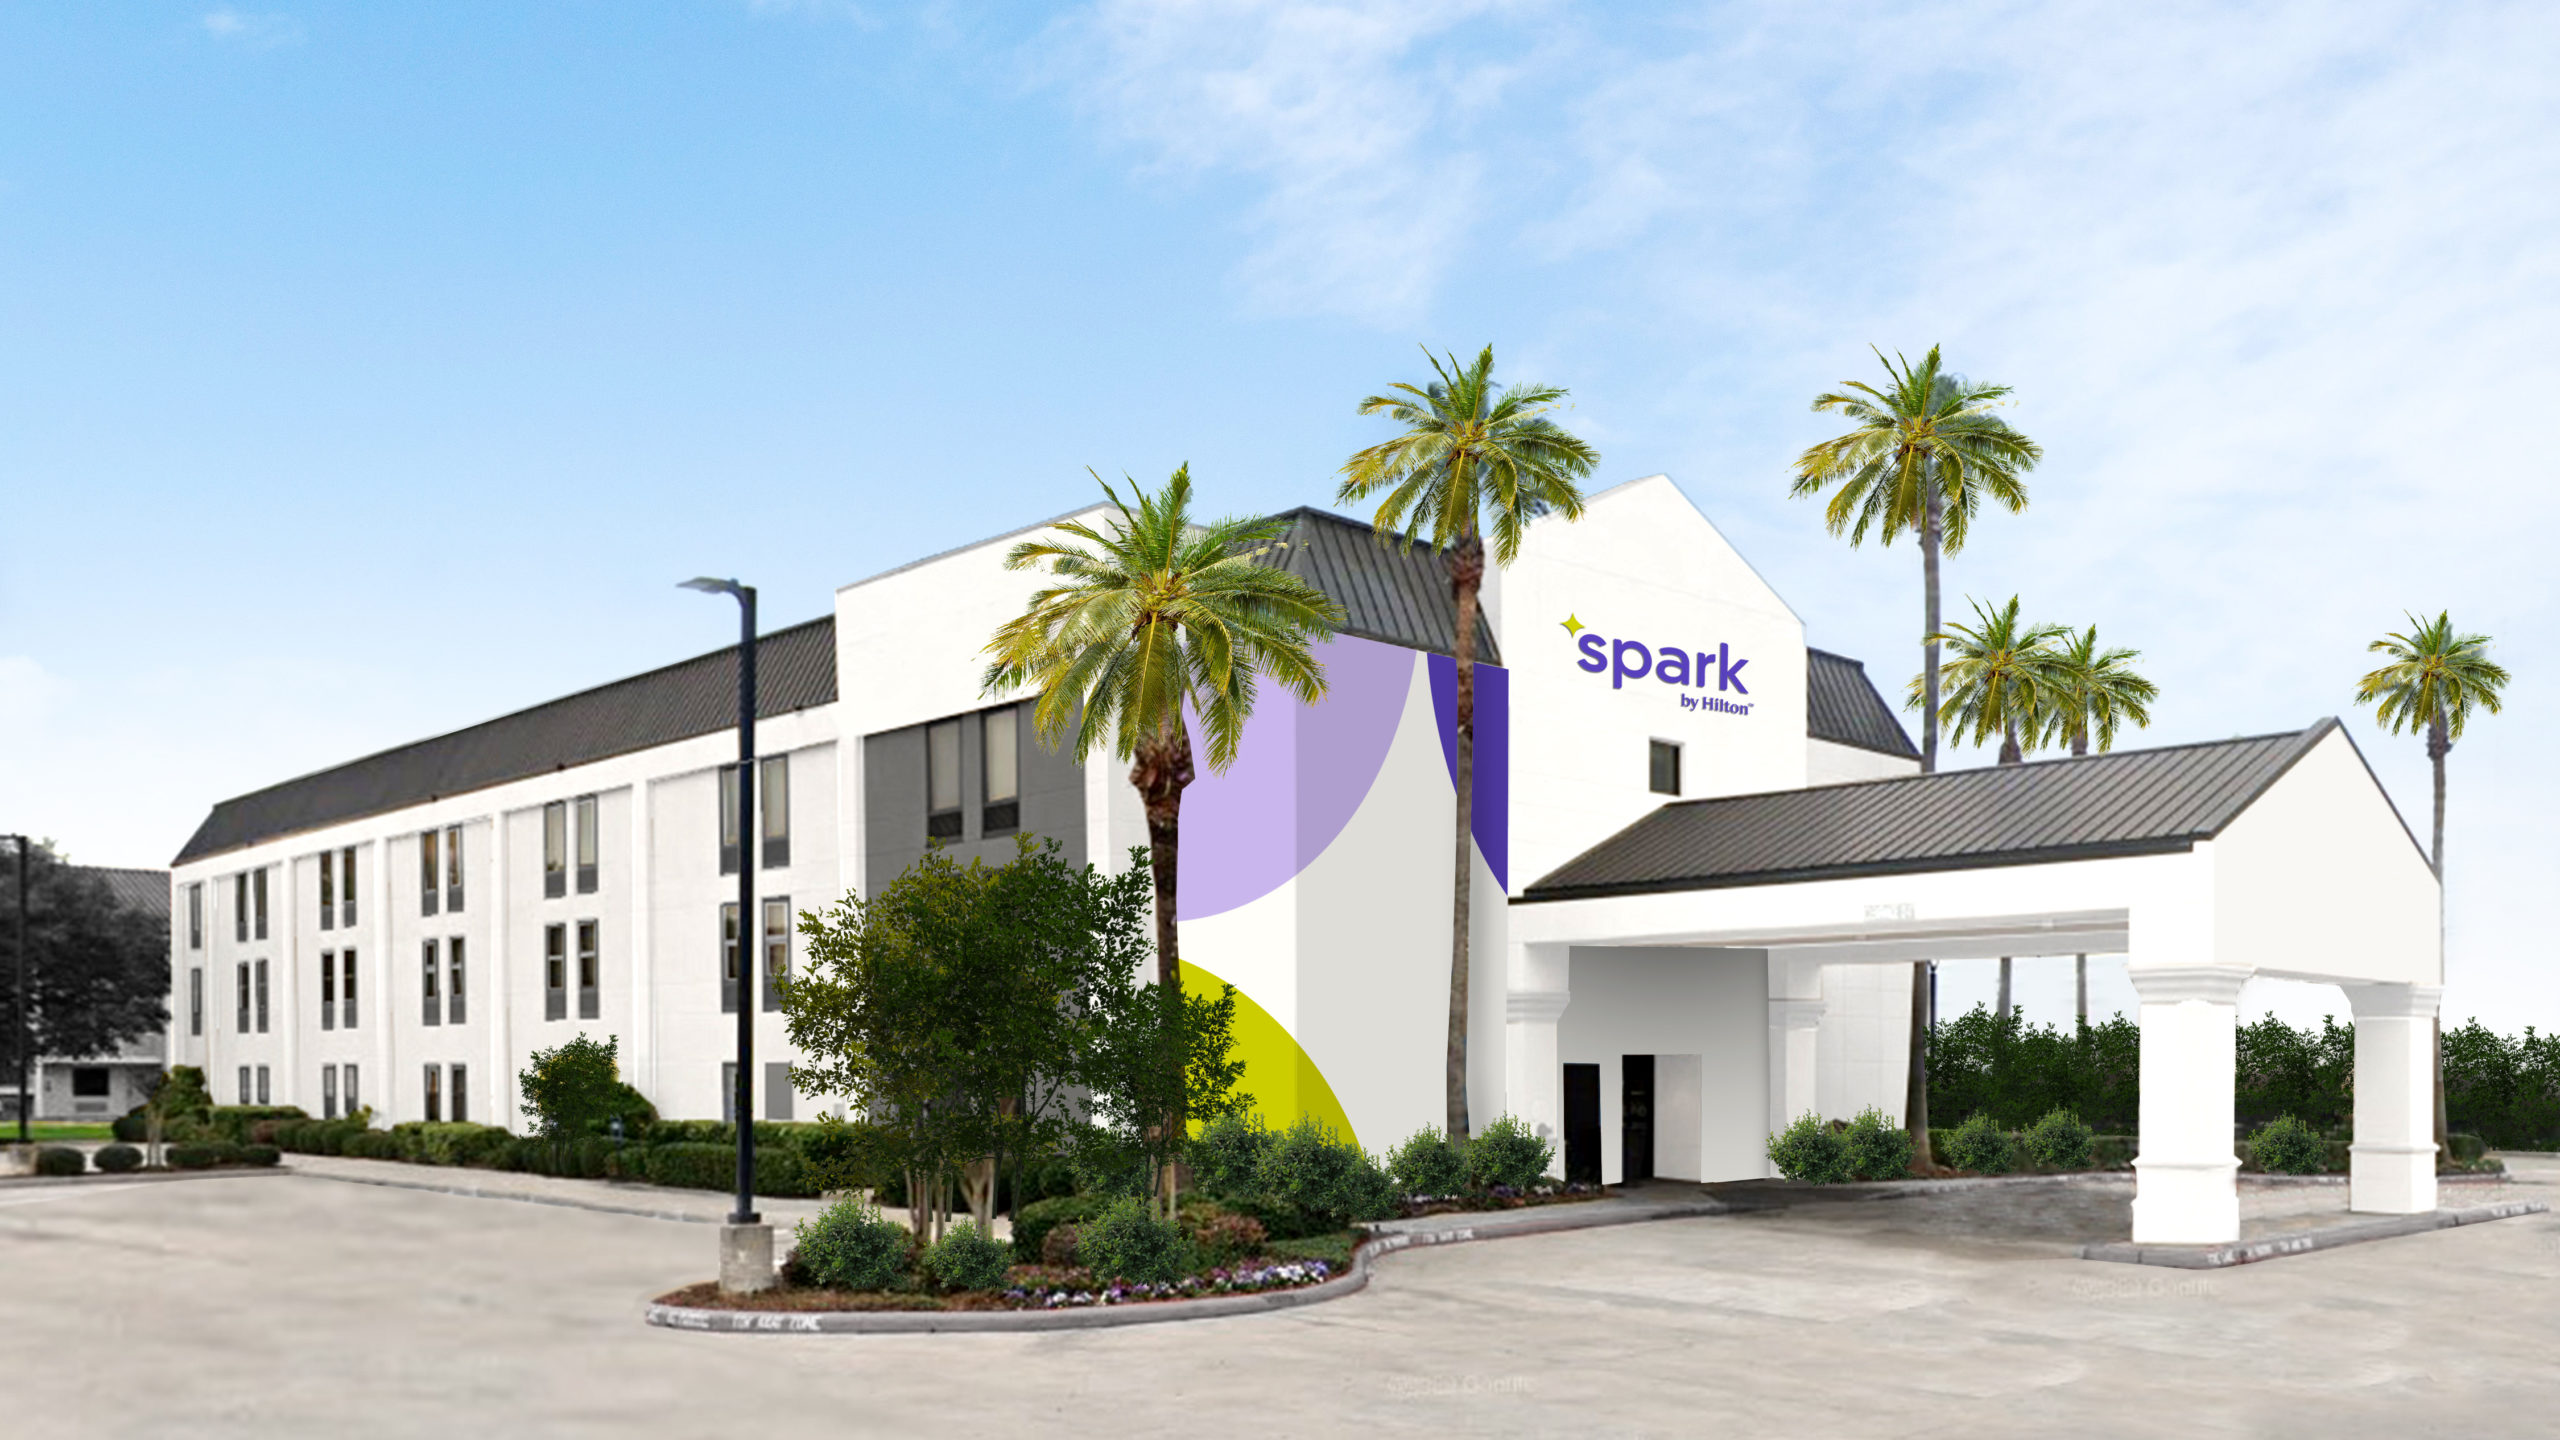 Spark By Hilton Value Brand Launched